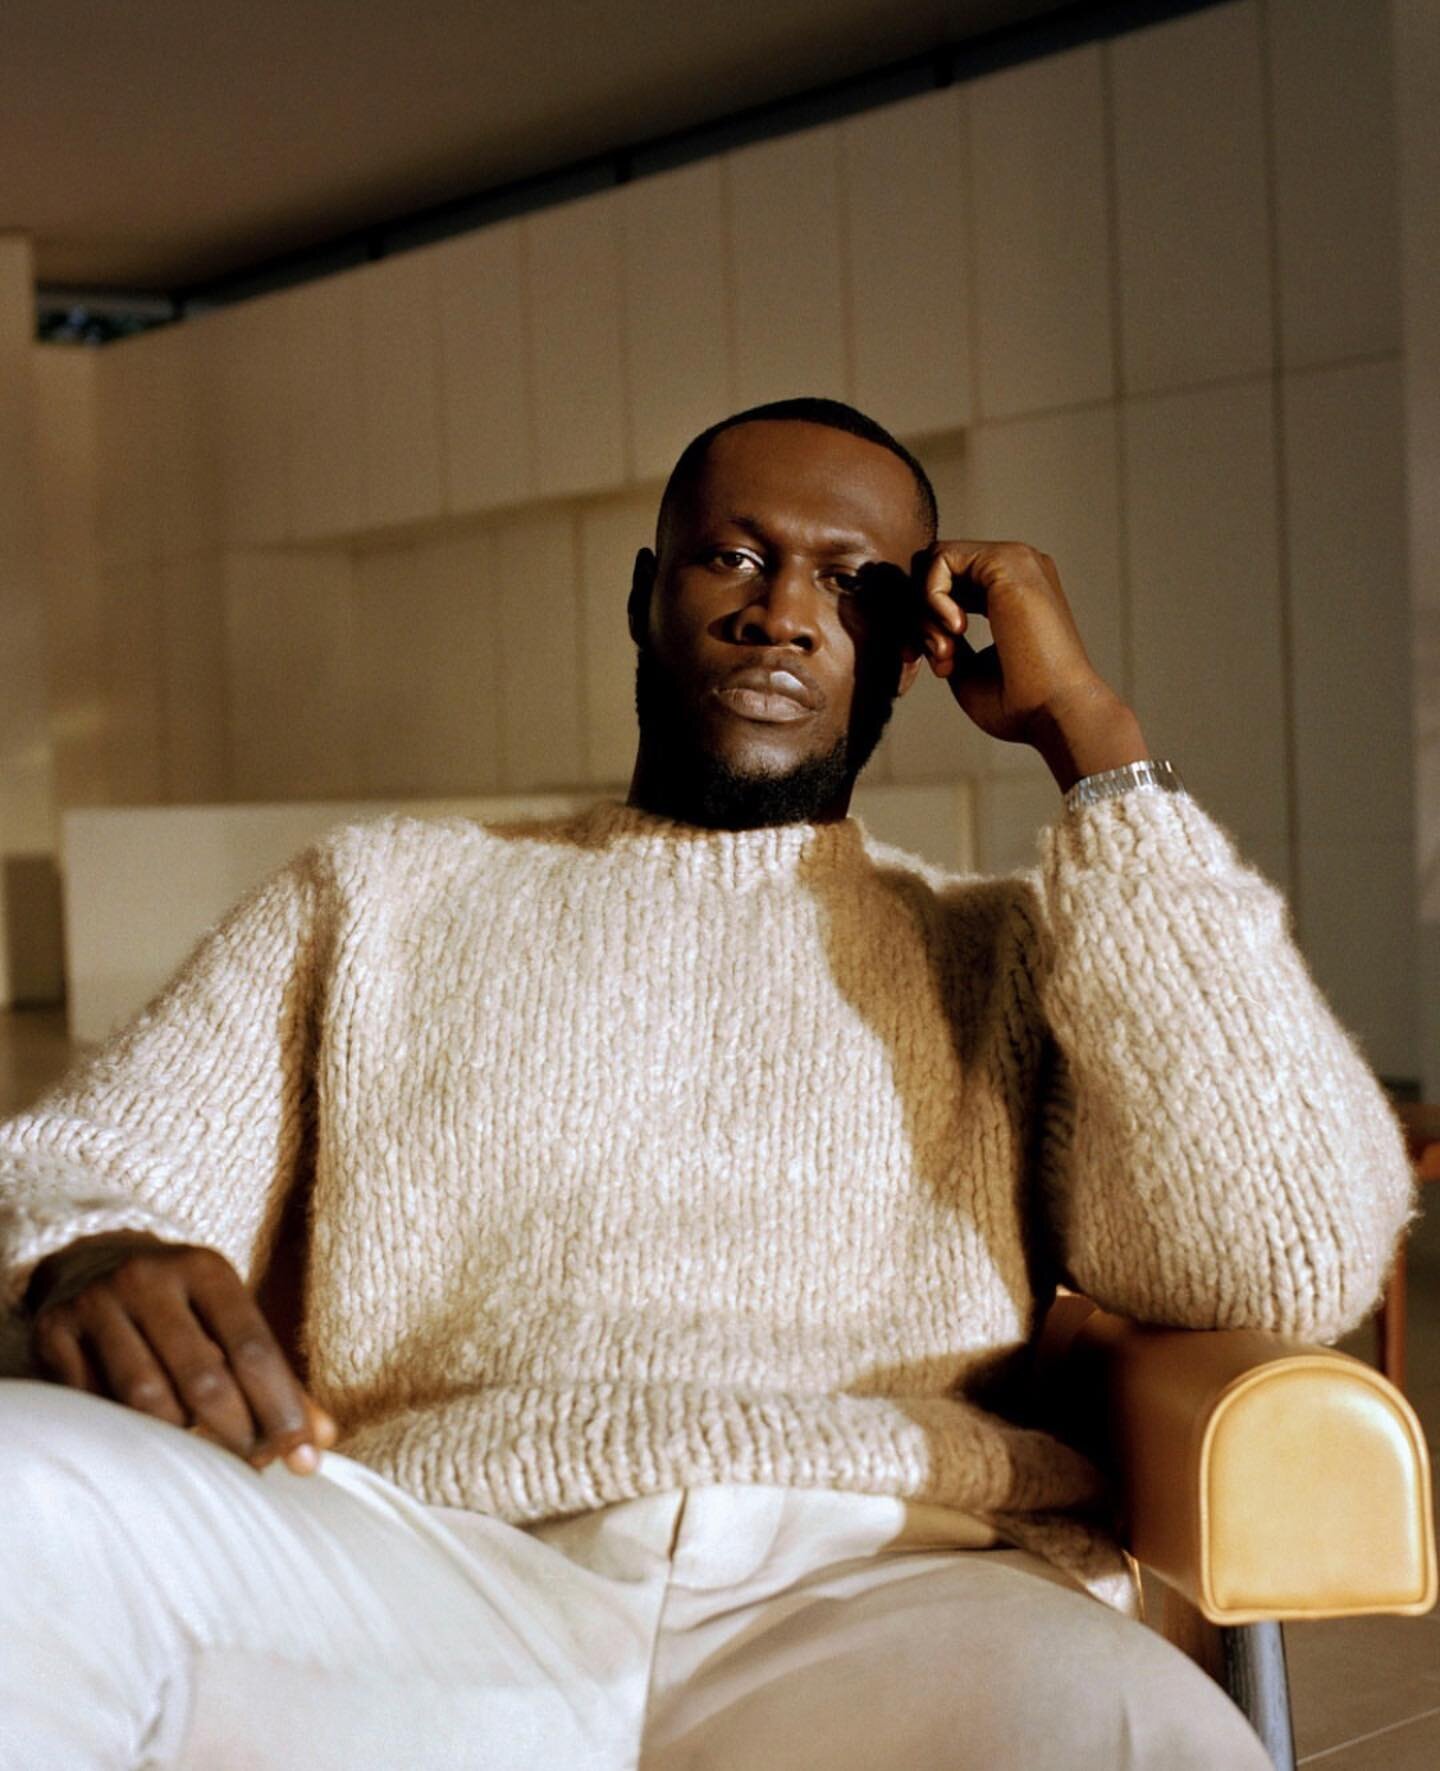 Thanksgiving Day came &amp; went but not without new tunes for us to jam out to the next coming weeks. 

Stormzy debuted his new album, &lsquo;This is What I Mean,&rsquo; this past Friday. 

Other folks with new bops to drops include Jadu Heart, Meta